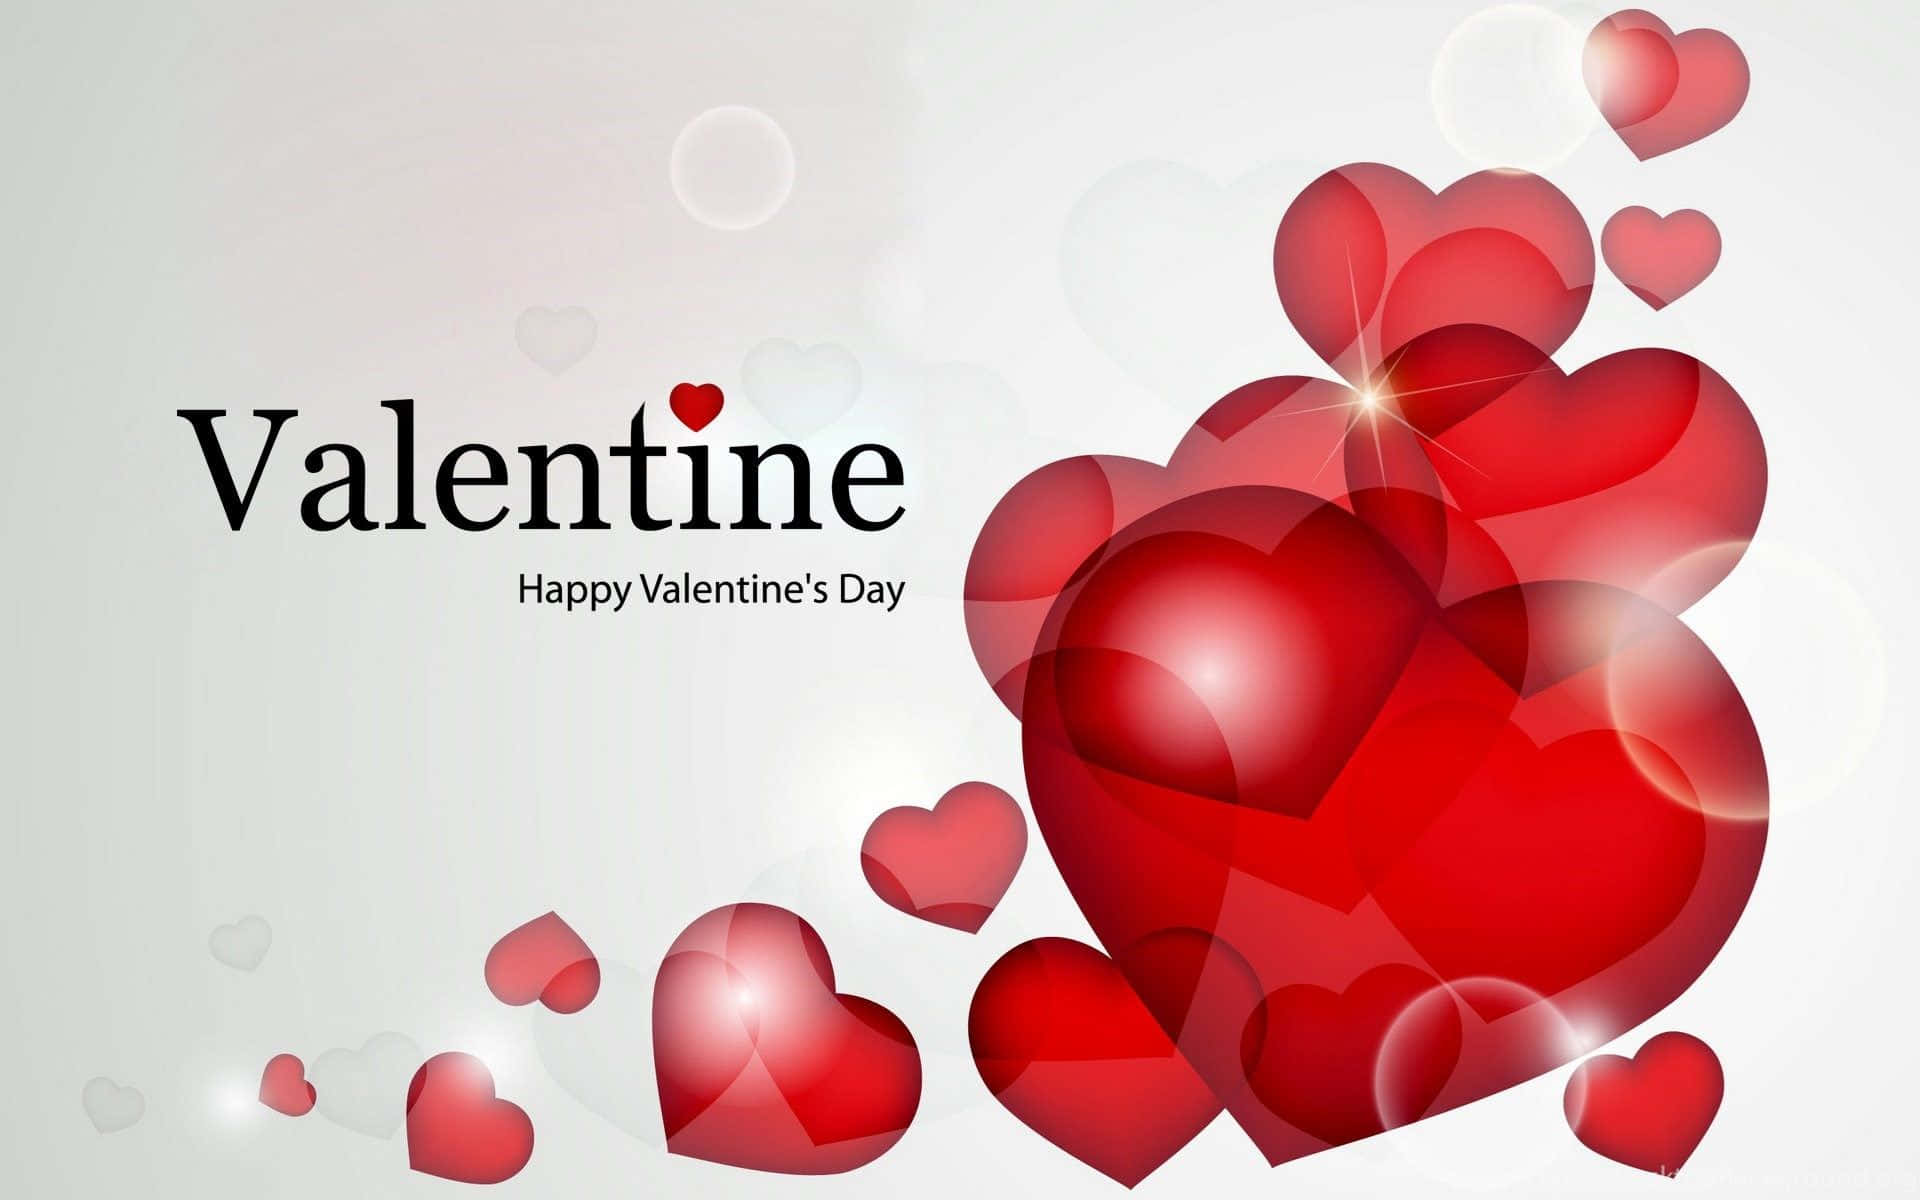 Valentine's Day: A day to celebrate your special person.